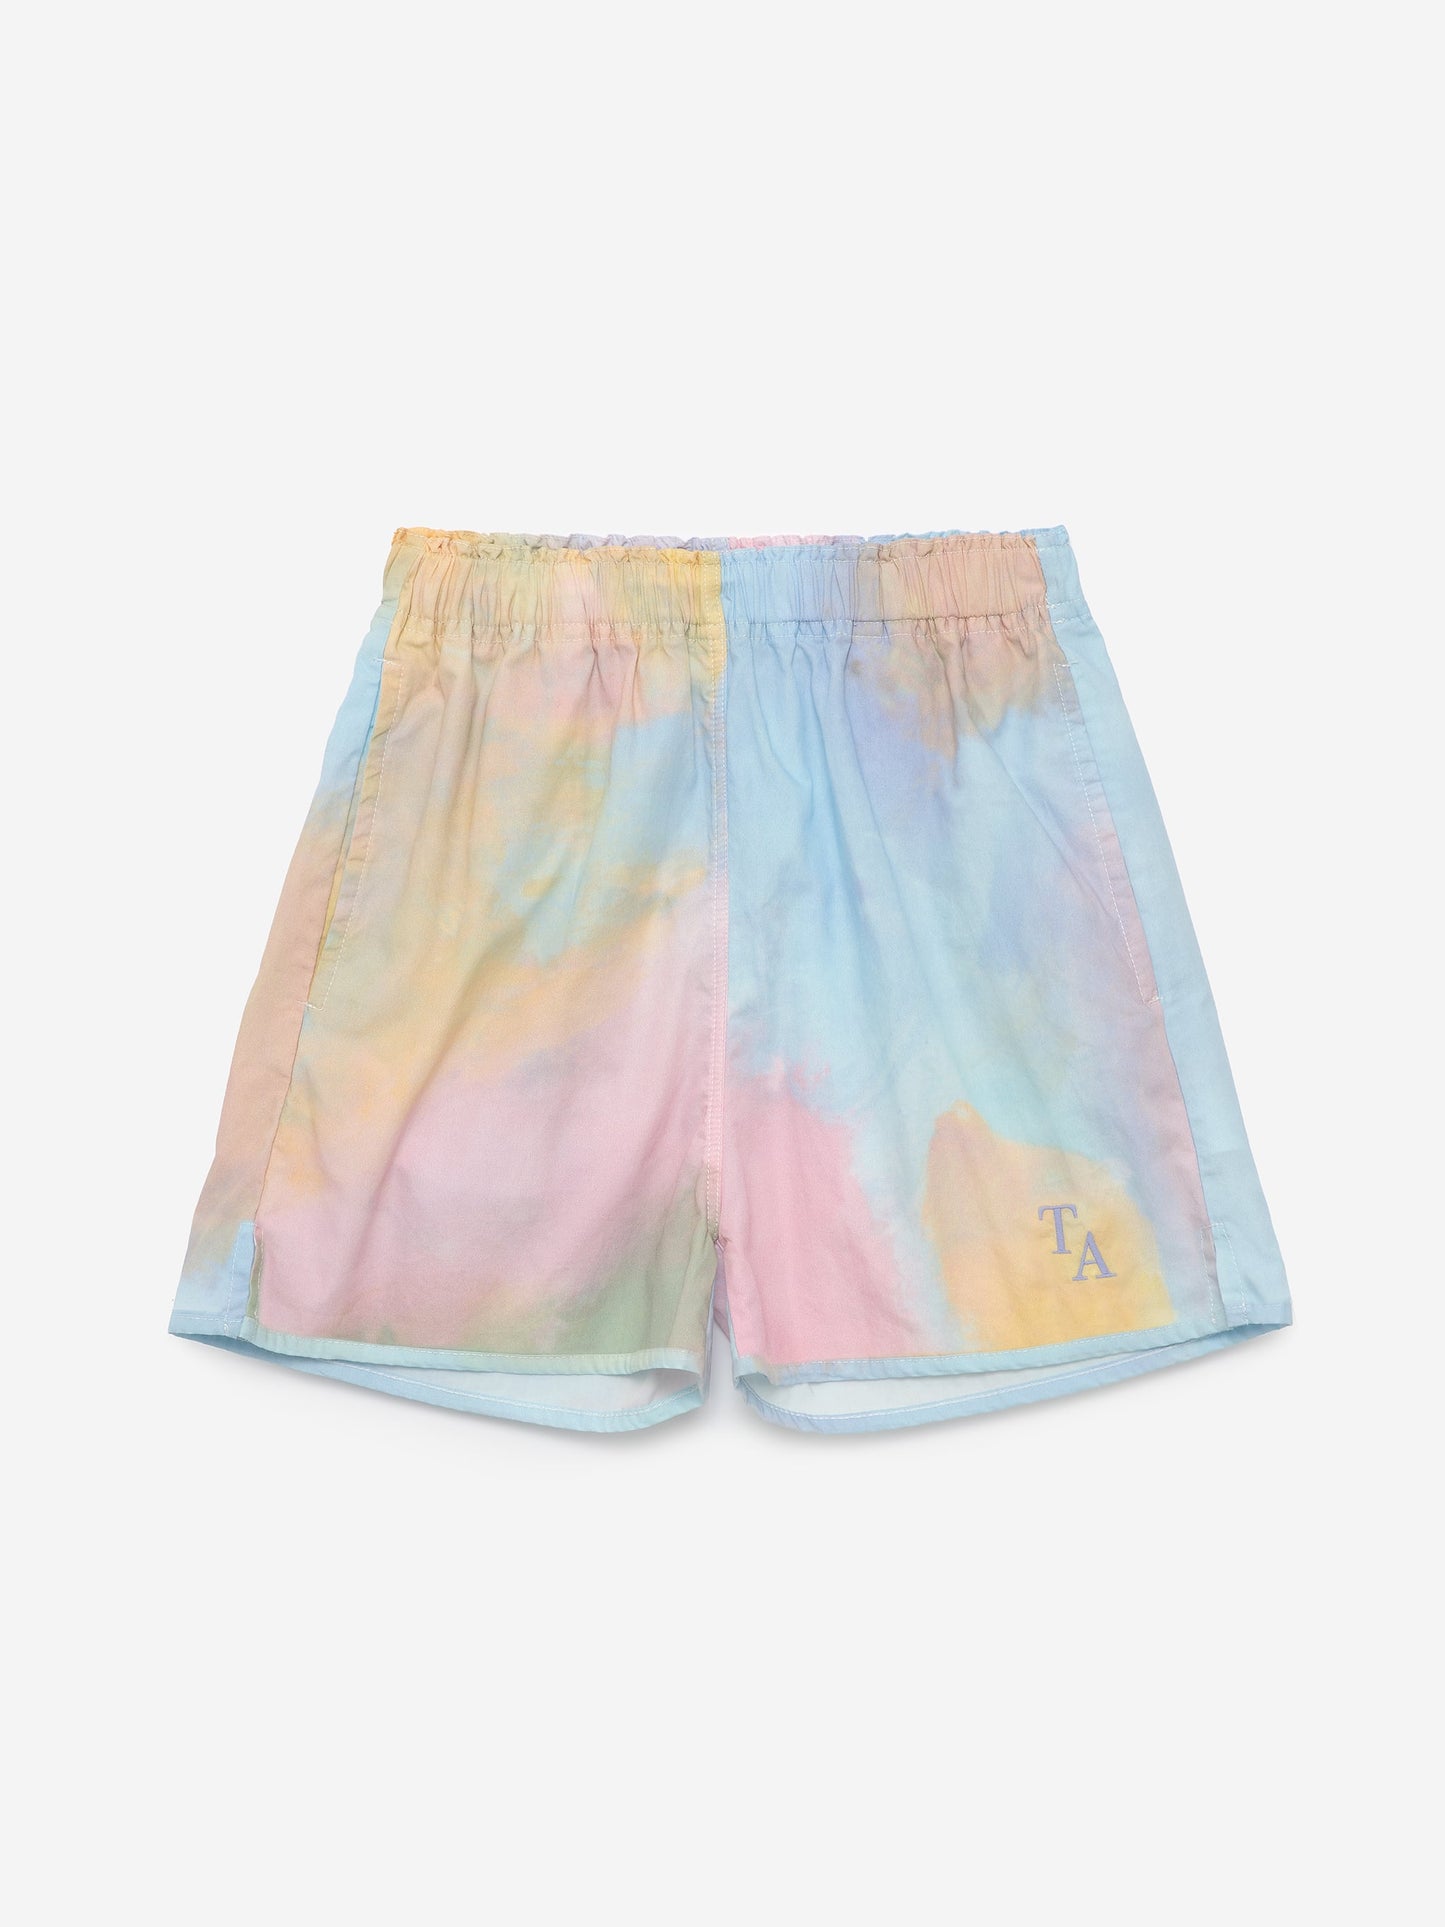 Clouds Shorts